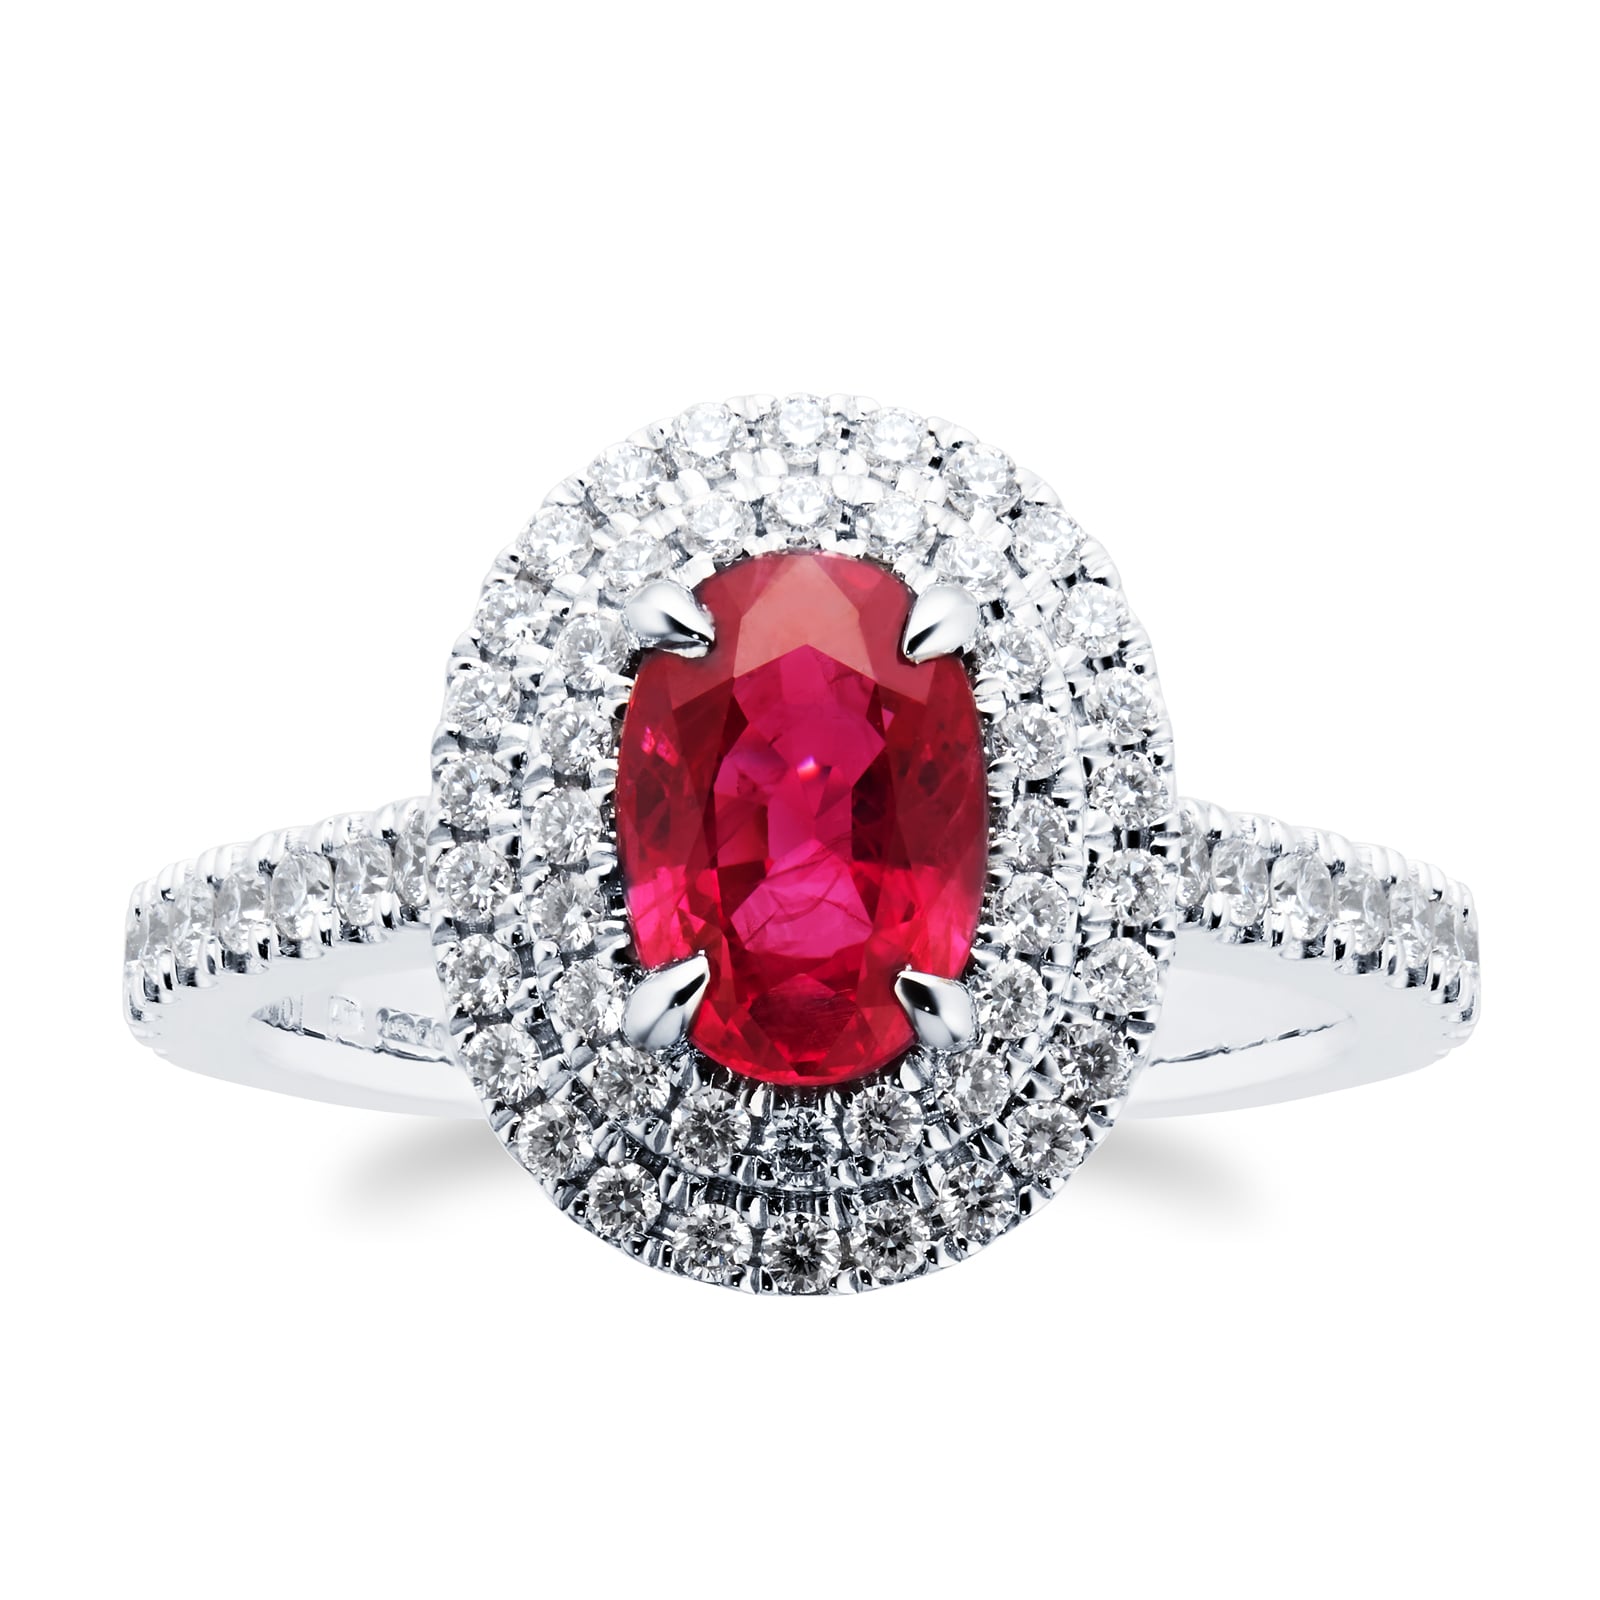 Platinum 1.61ct Oval Cut Ruby & 0.54cttw Diamond Ring - Ring Size N